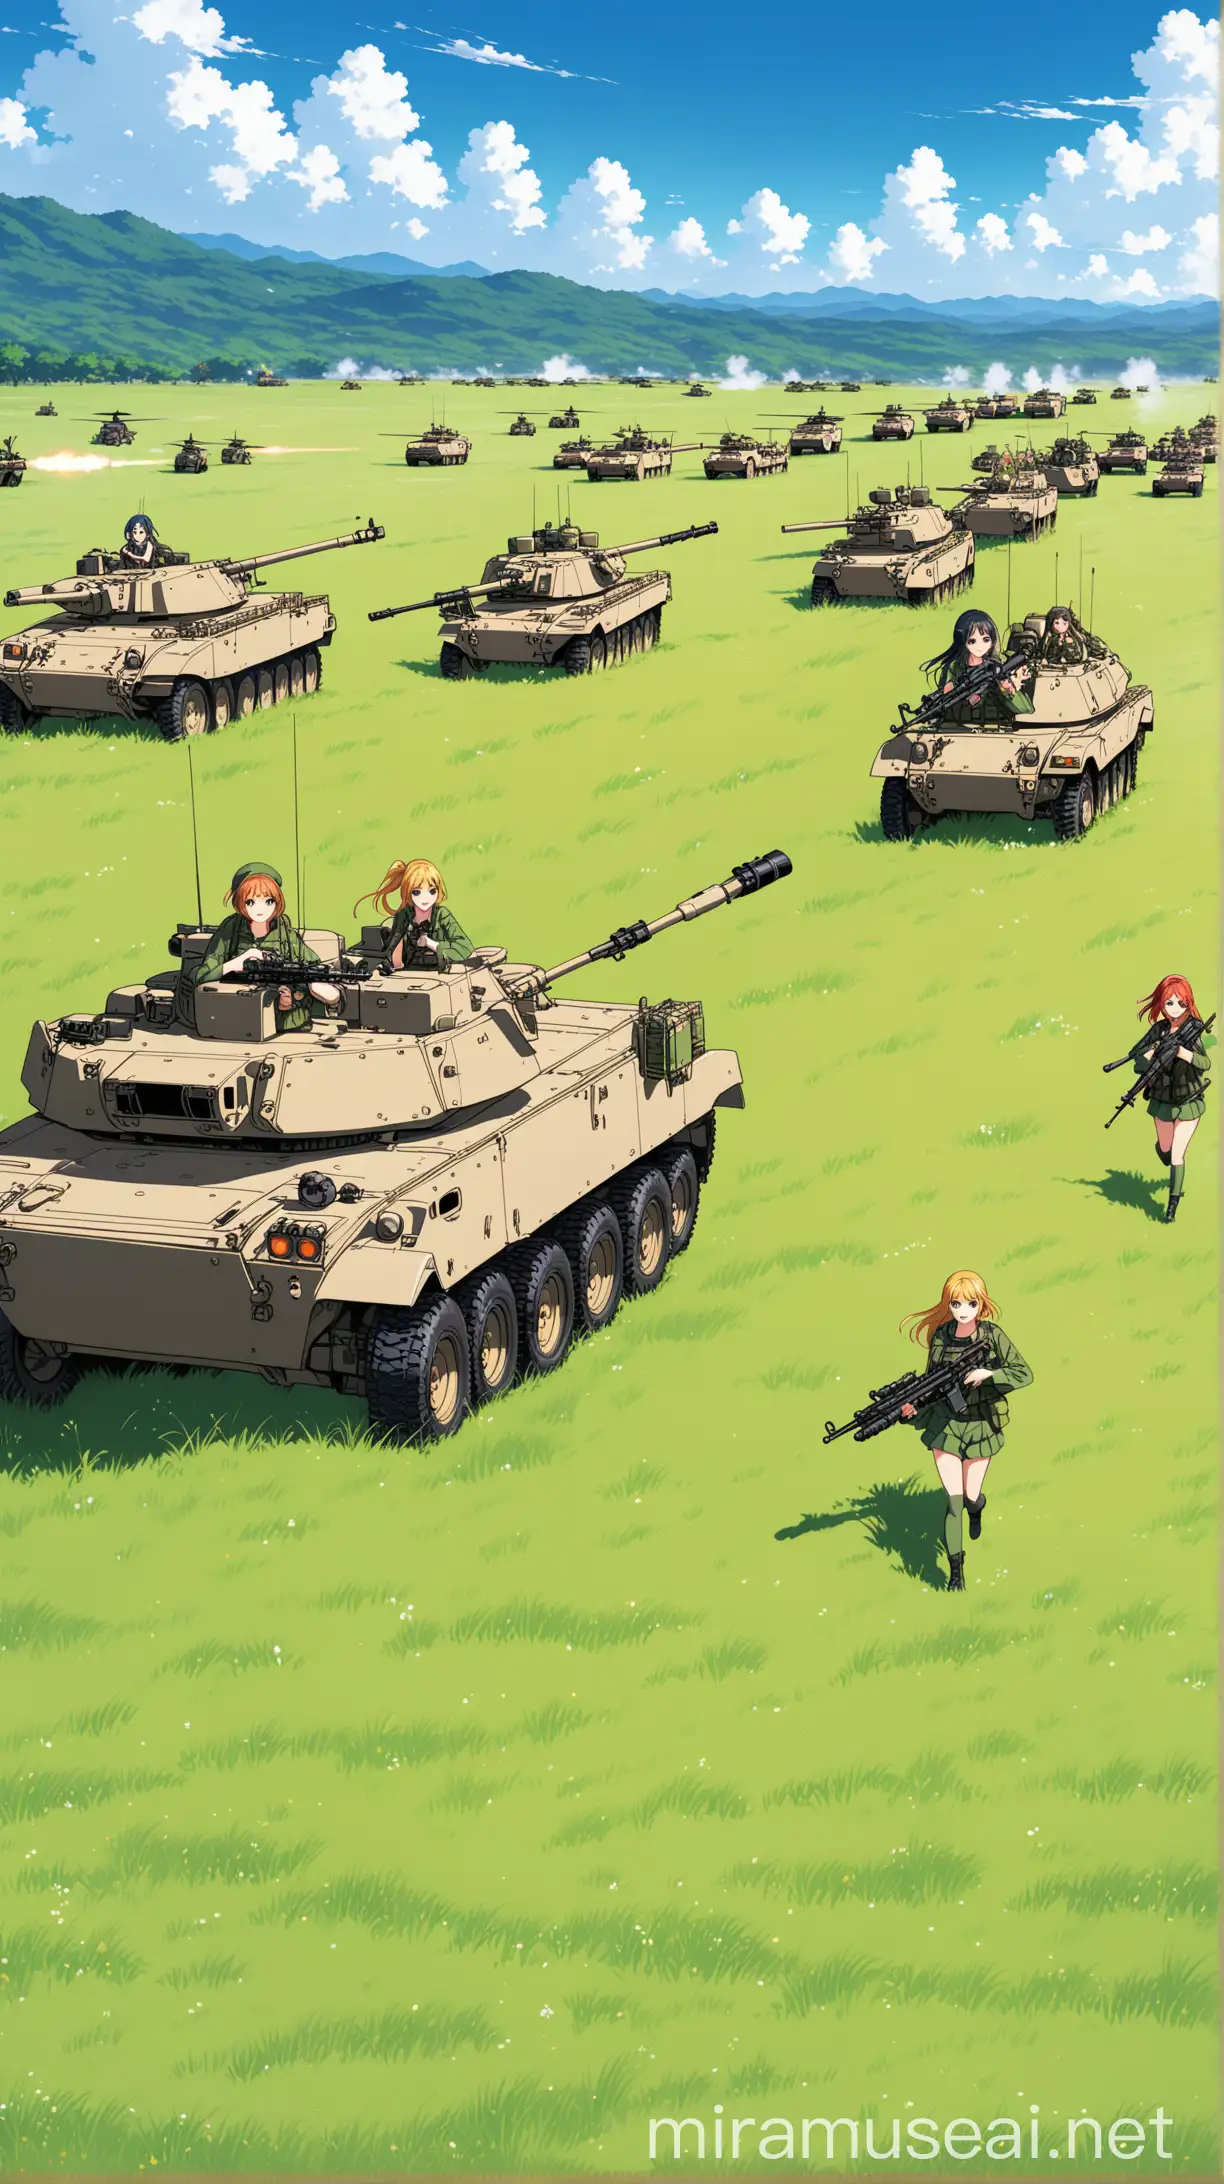 An army of anime girls marcing through a grassland with snipers, tanks, military choppers, trucks, jeeps 